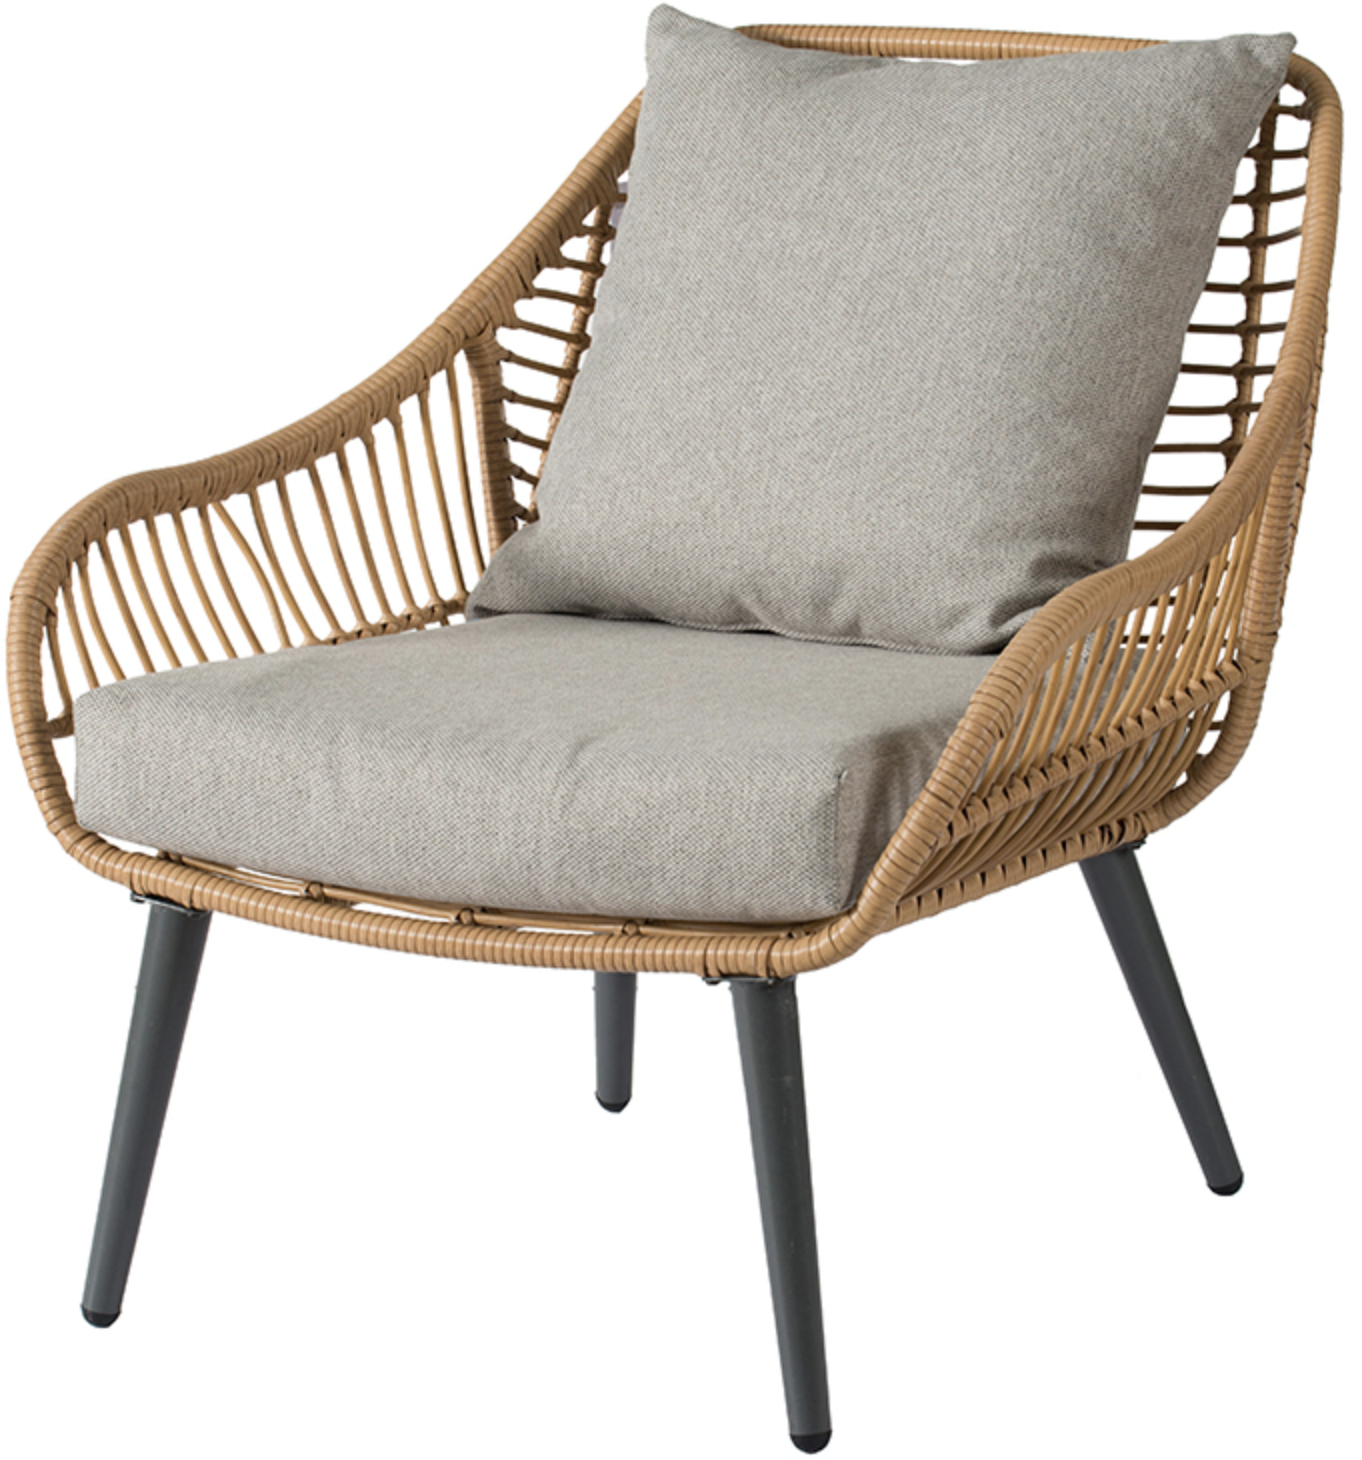 A & B Home Natural/Soft Gray Wicker Single Chair